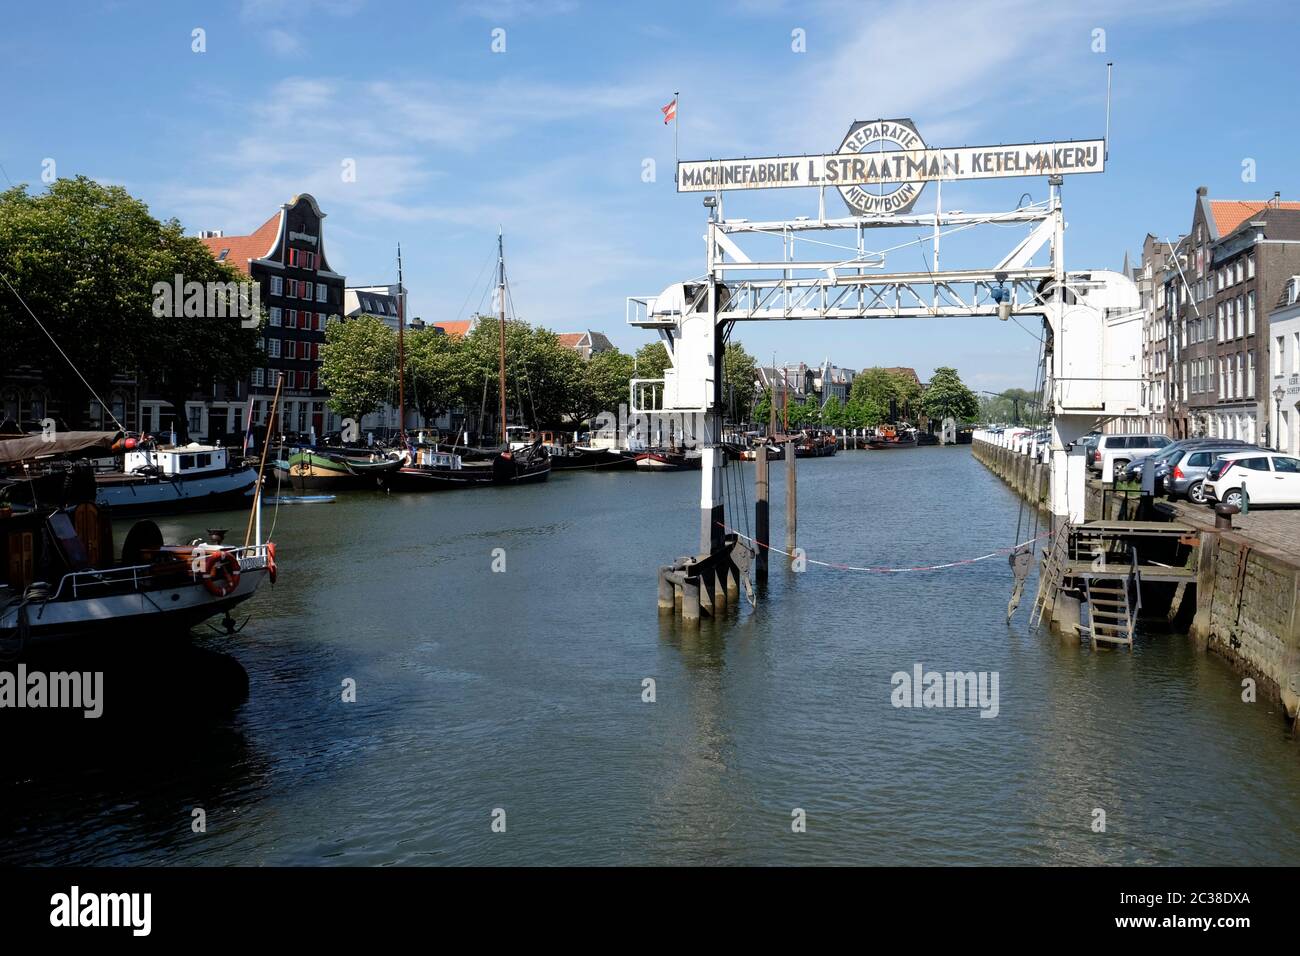 Historic ship or boat lift in Wolwevershaven, Dordrecht Harbour, Netherlands. Stock Photo